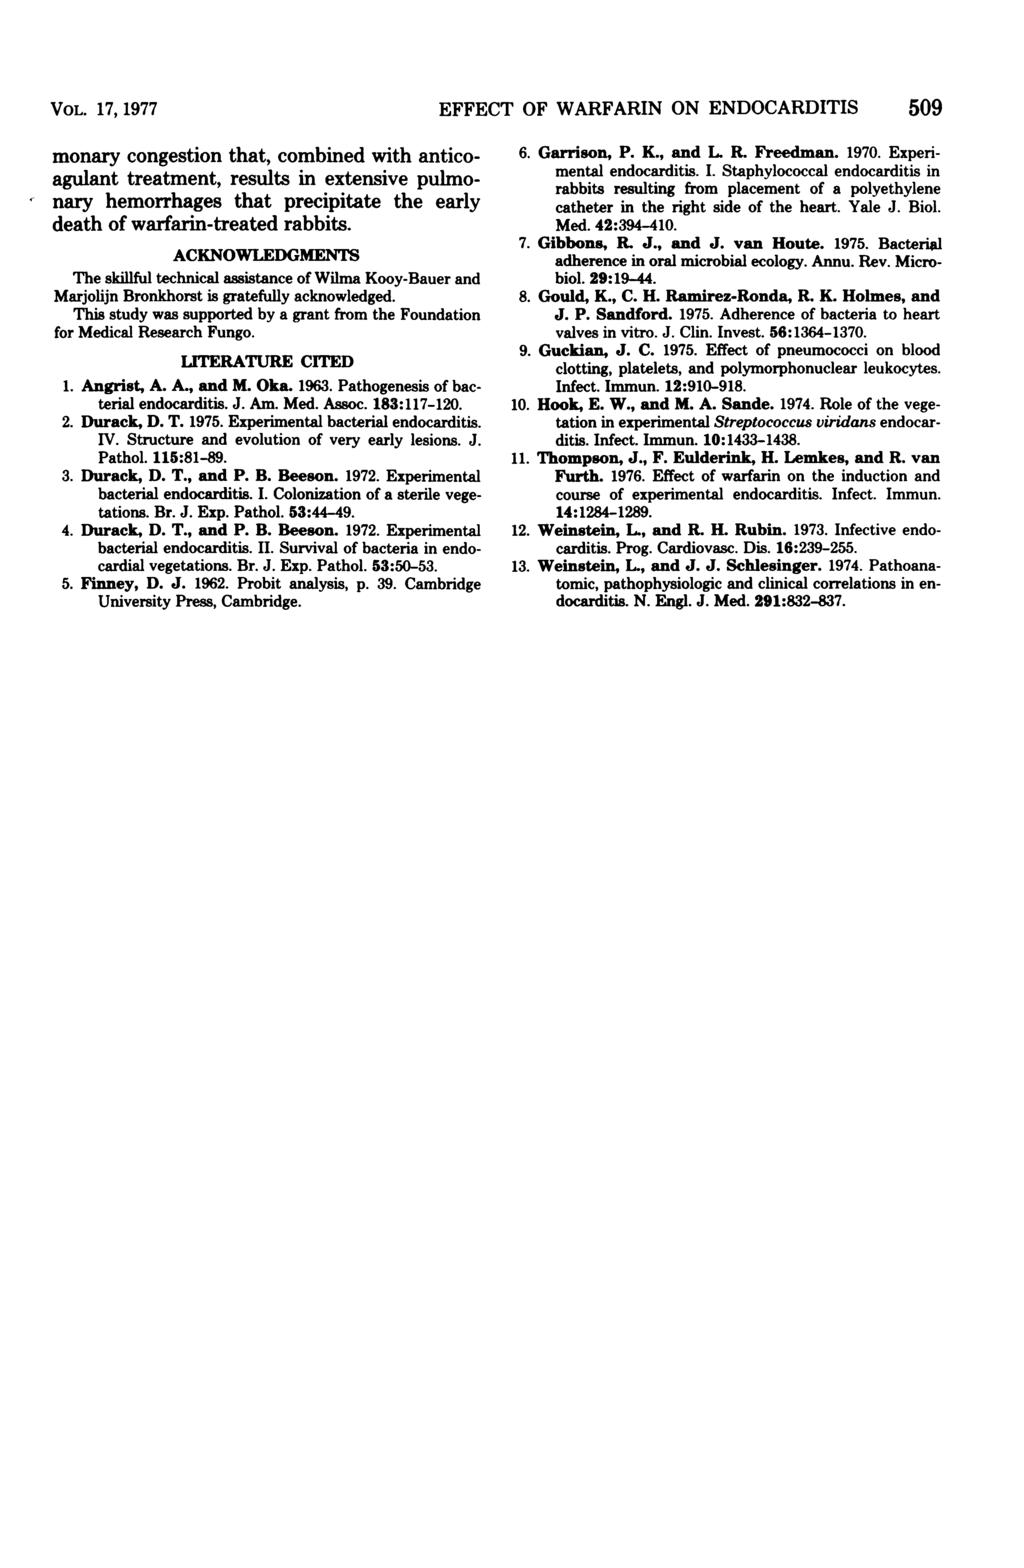 VOL. 17, 1977 EFFECT OF WARFARIN ON ENDOCARDITIS 509 monary congestion that, combined with anticoagulant treatment, results in extensive pulmonary hemorrhages that precipitate the early death of